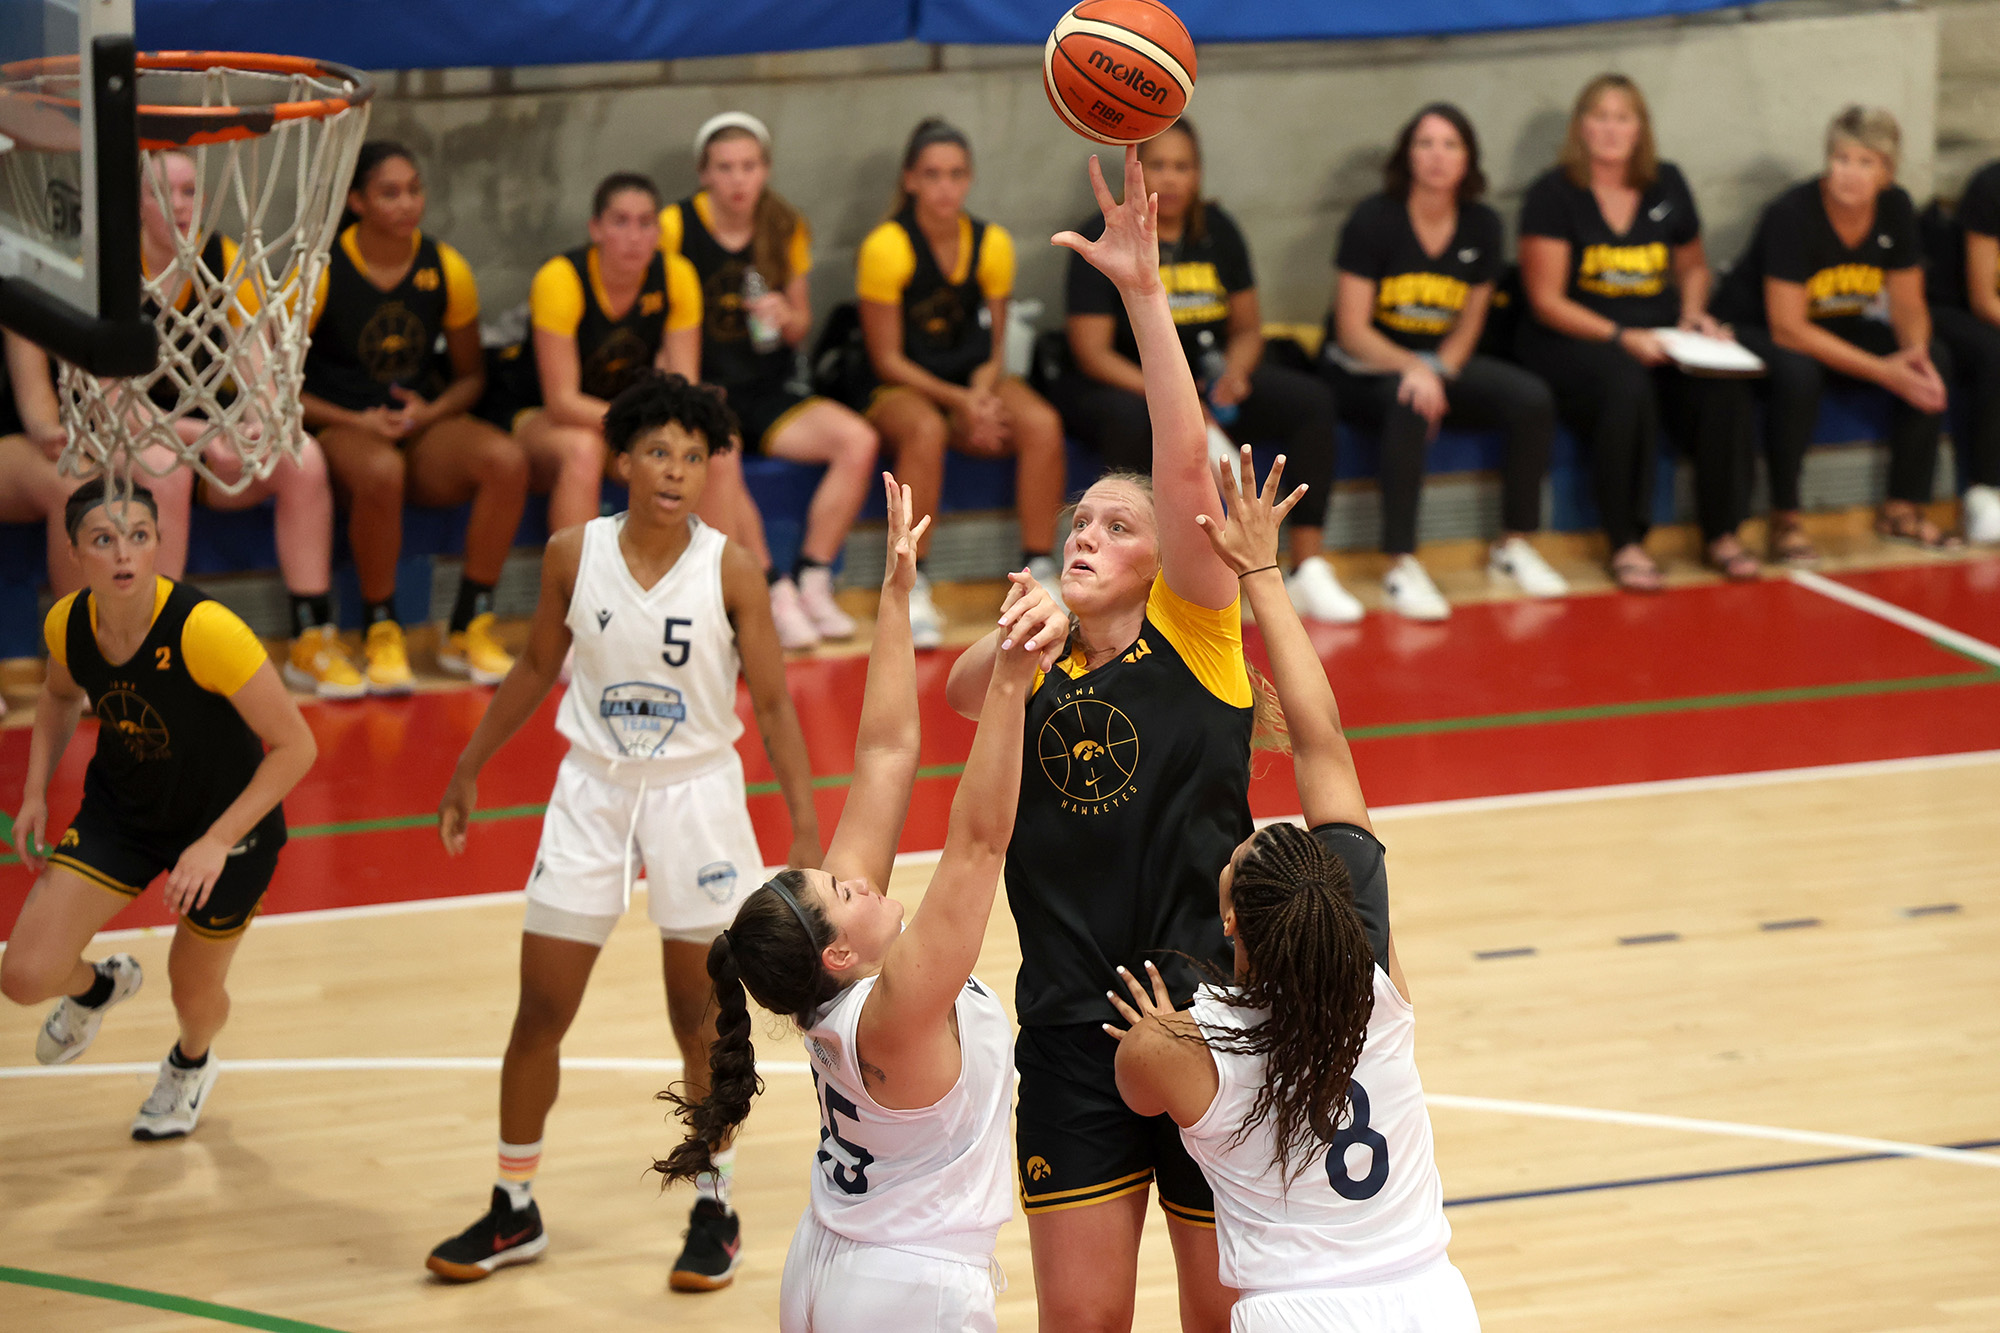 University of Iowa women's basketball player Sharon Goodman attempting a shot during a game in Europe